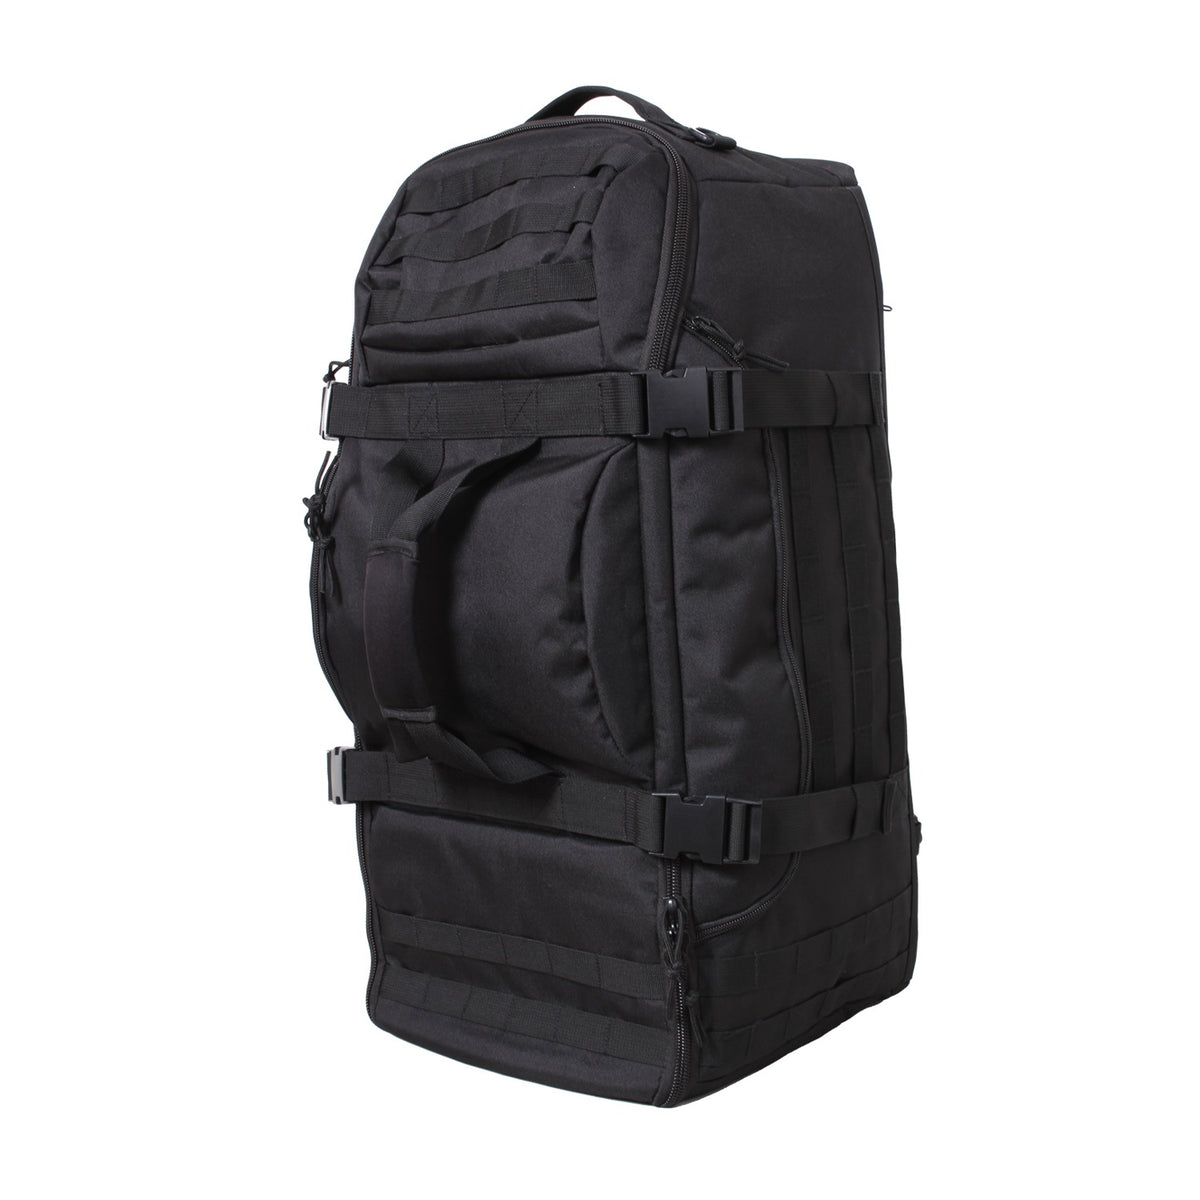 Rothco 3-In-1 Convertible Mission Bag Black